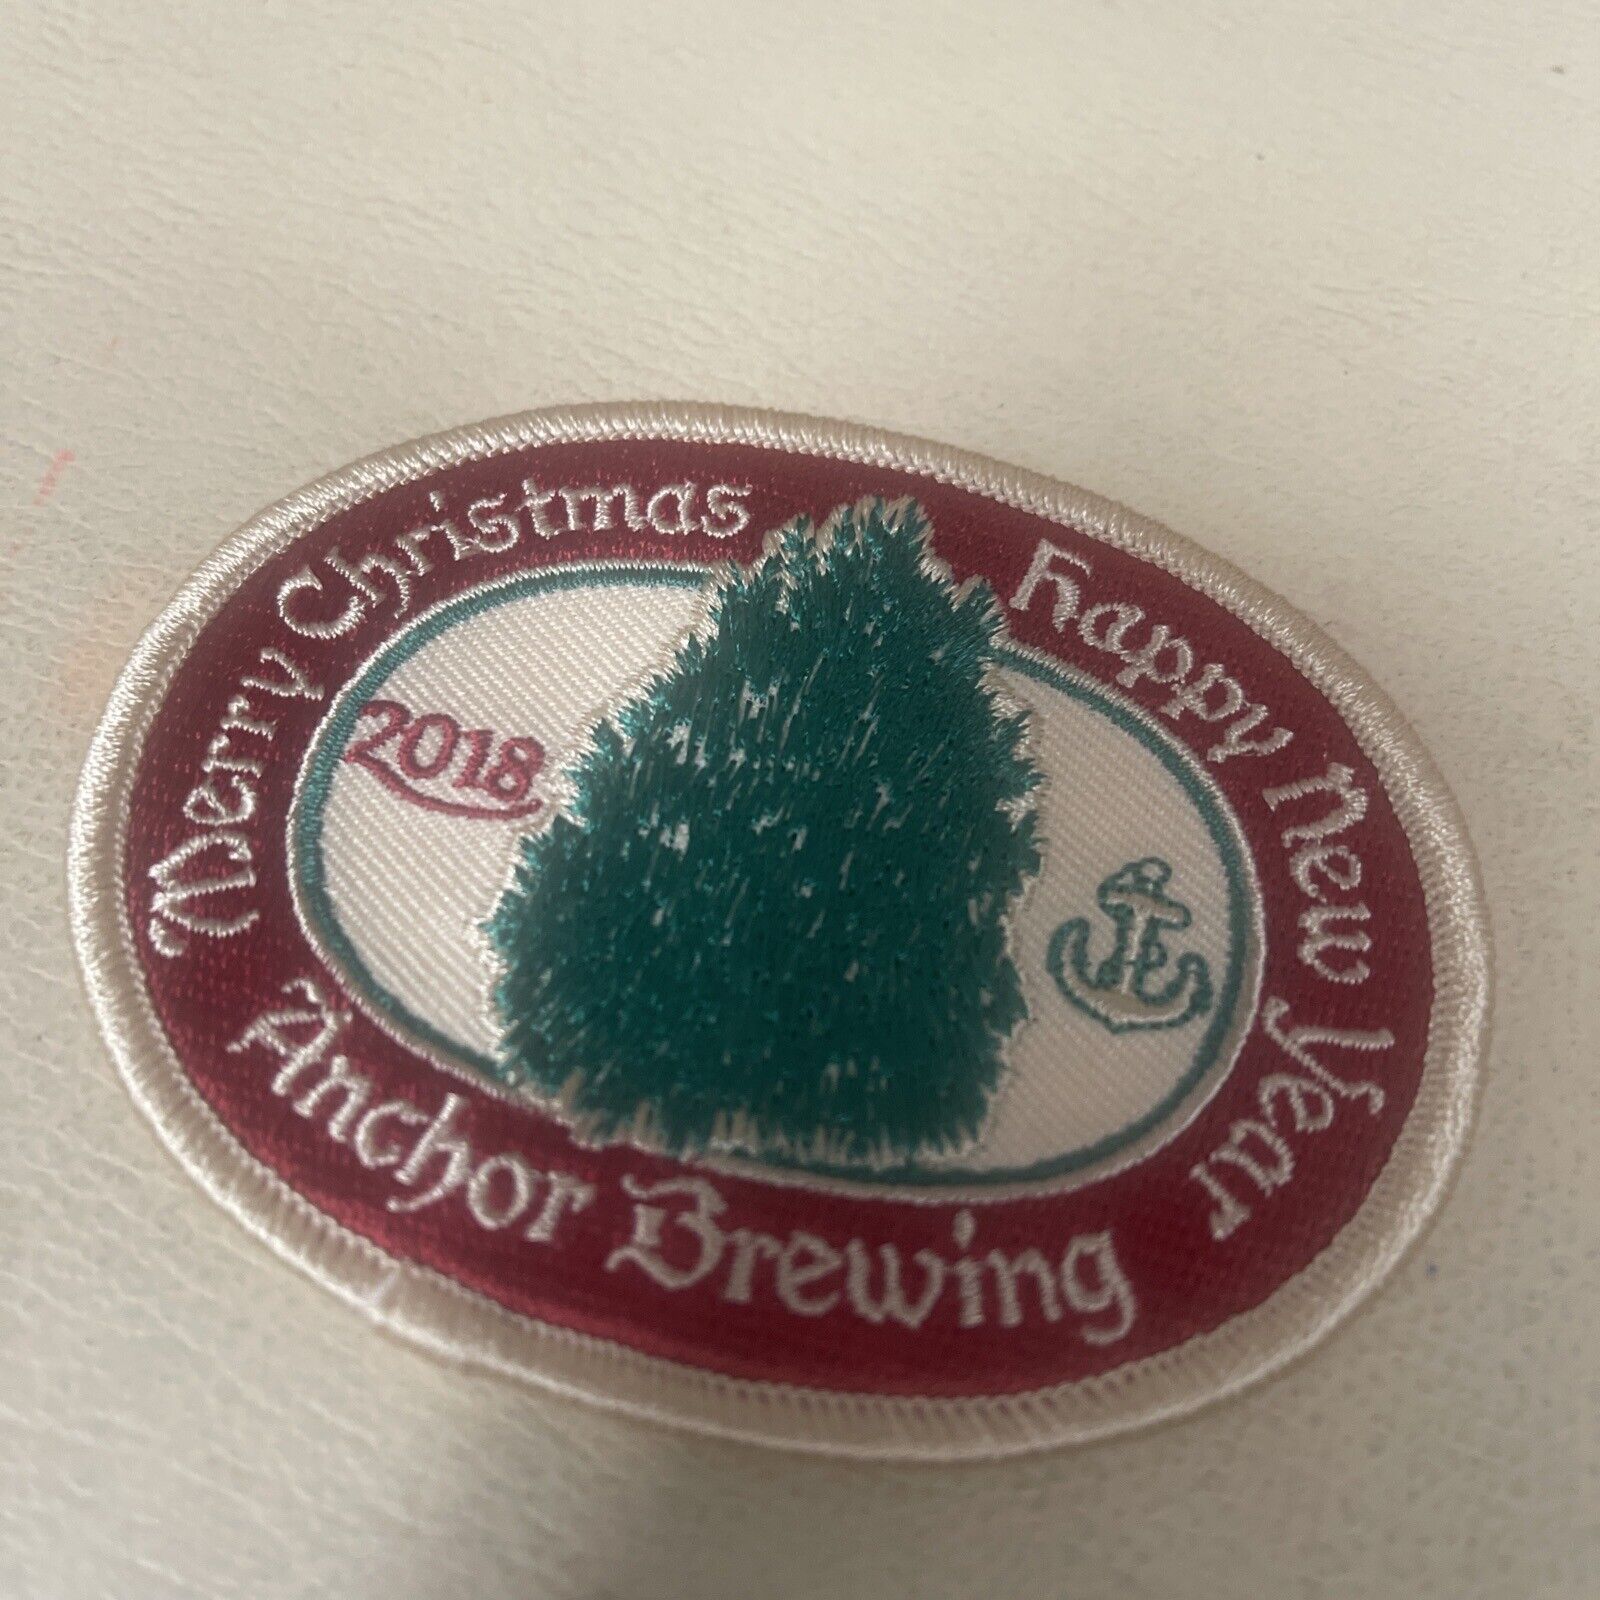 Anchor Brewing Co Christmas New Year 2018 Patch  Anchor Steam Beer.